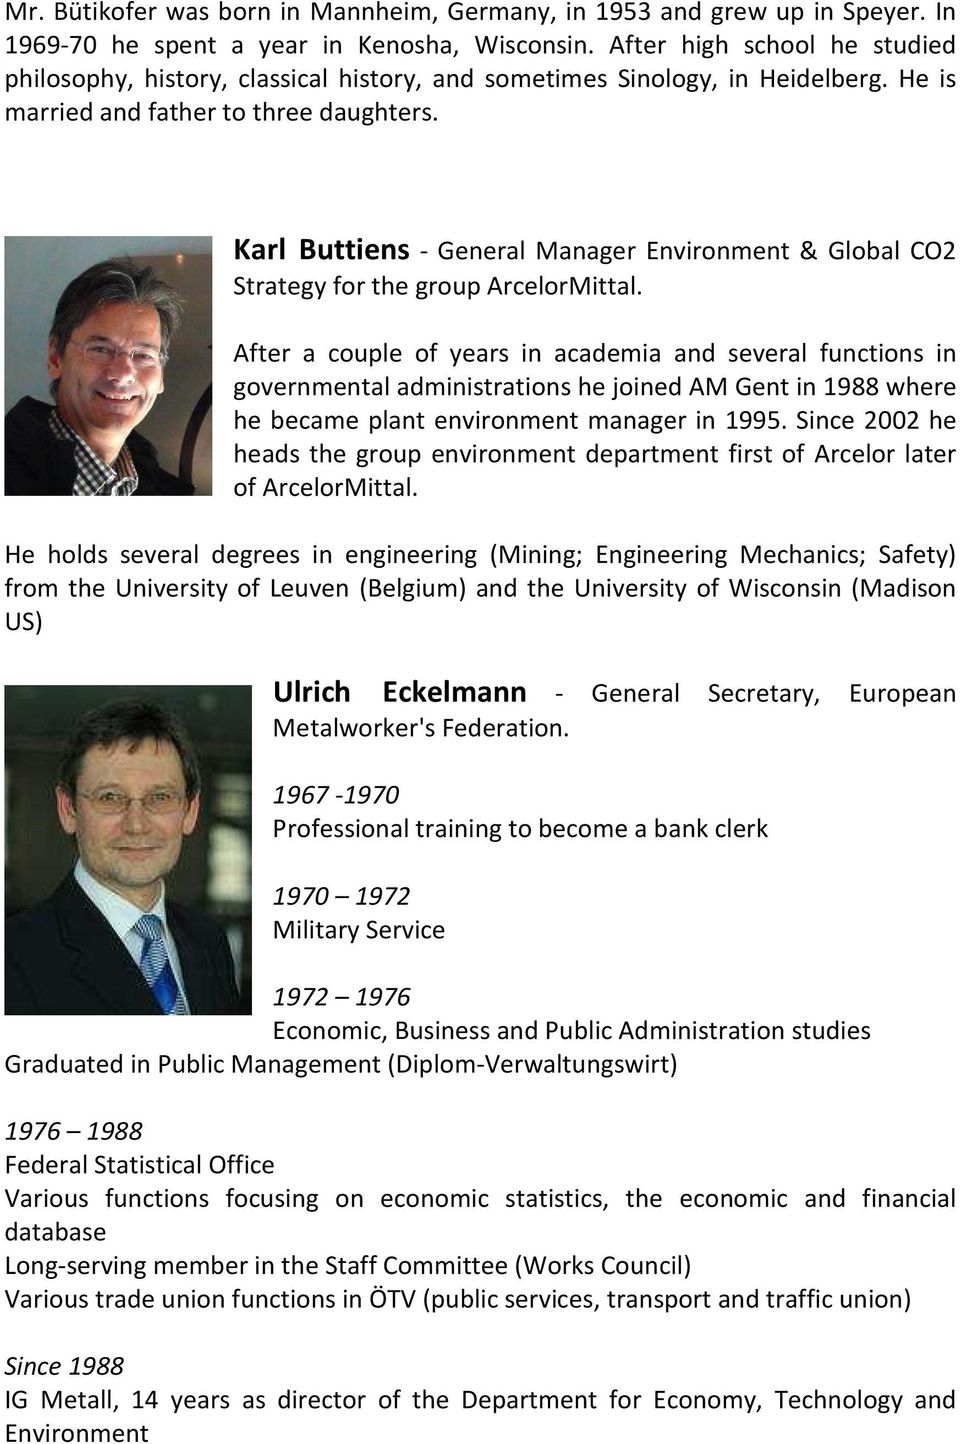 Karl Buttiens - General Manager Environment & Global CO2 Strategy for the group ArcelorMittal.